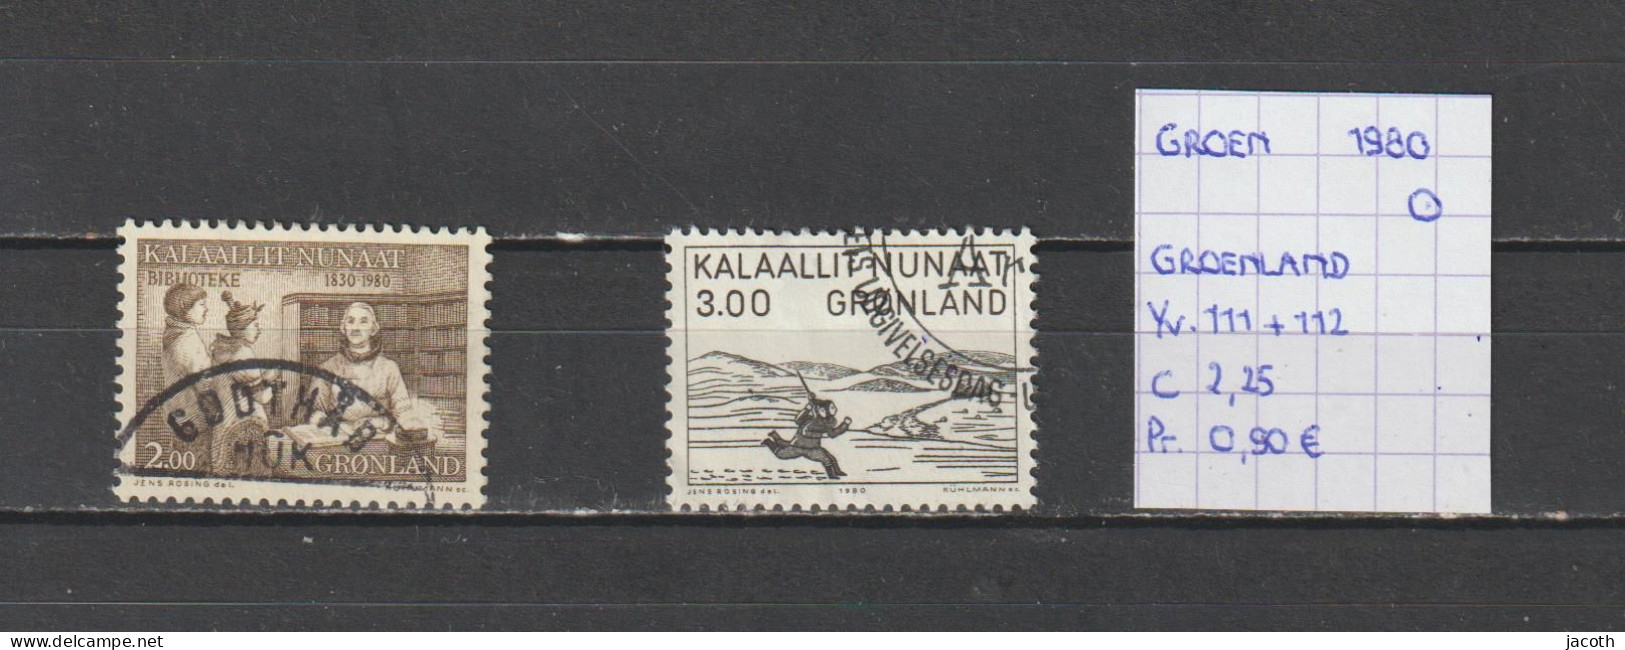 (TJ) Groenland 1980 - YT 111 + 112 (gest./obl./used) - Used Stamps